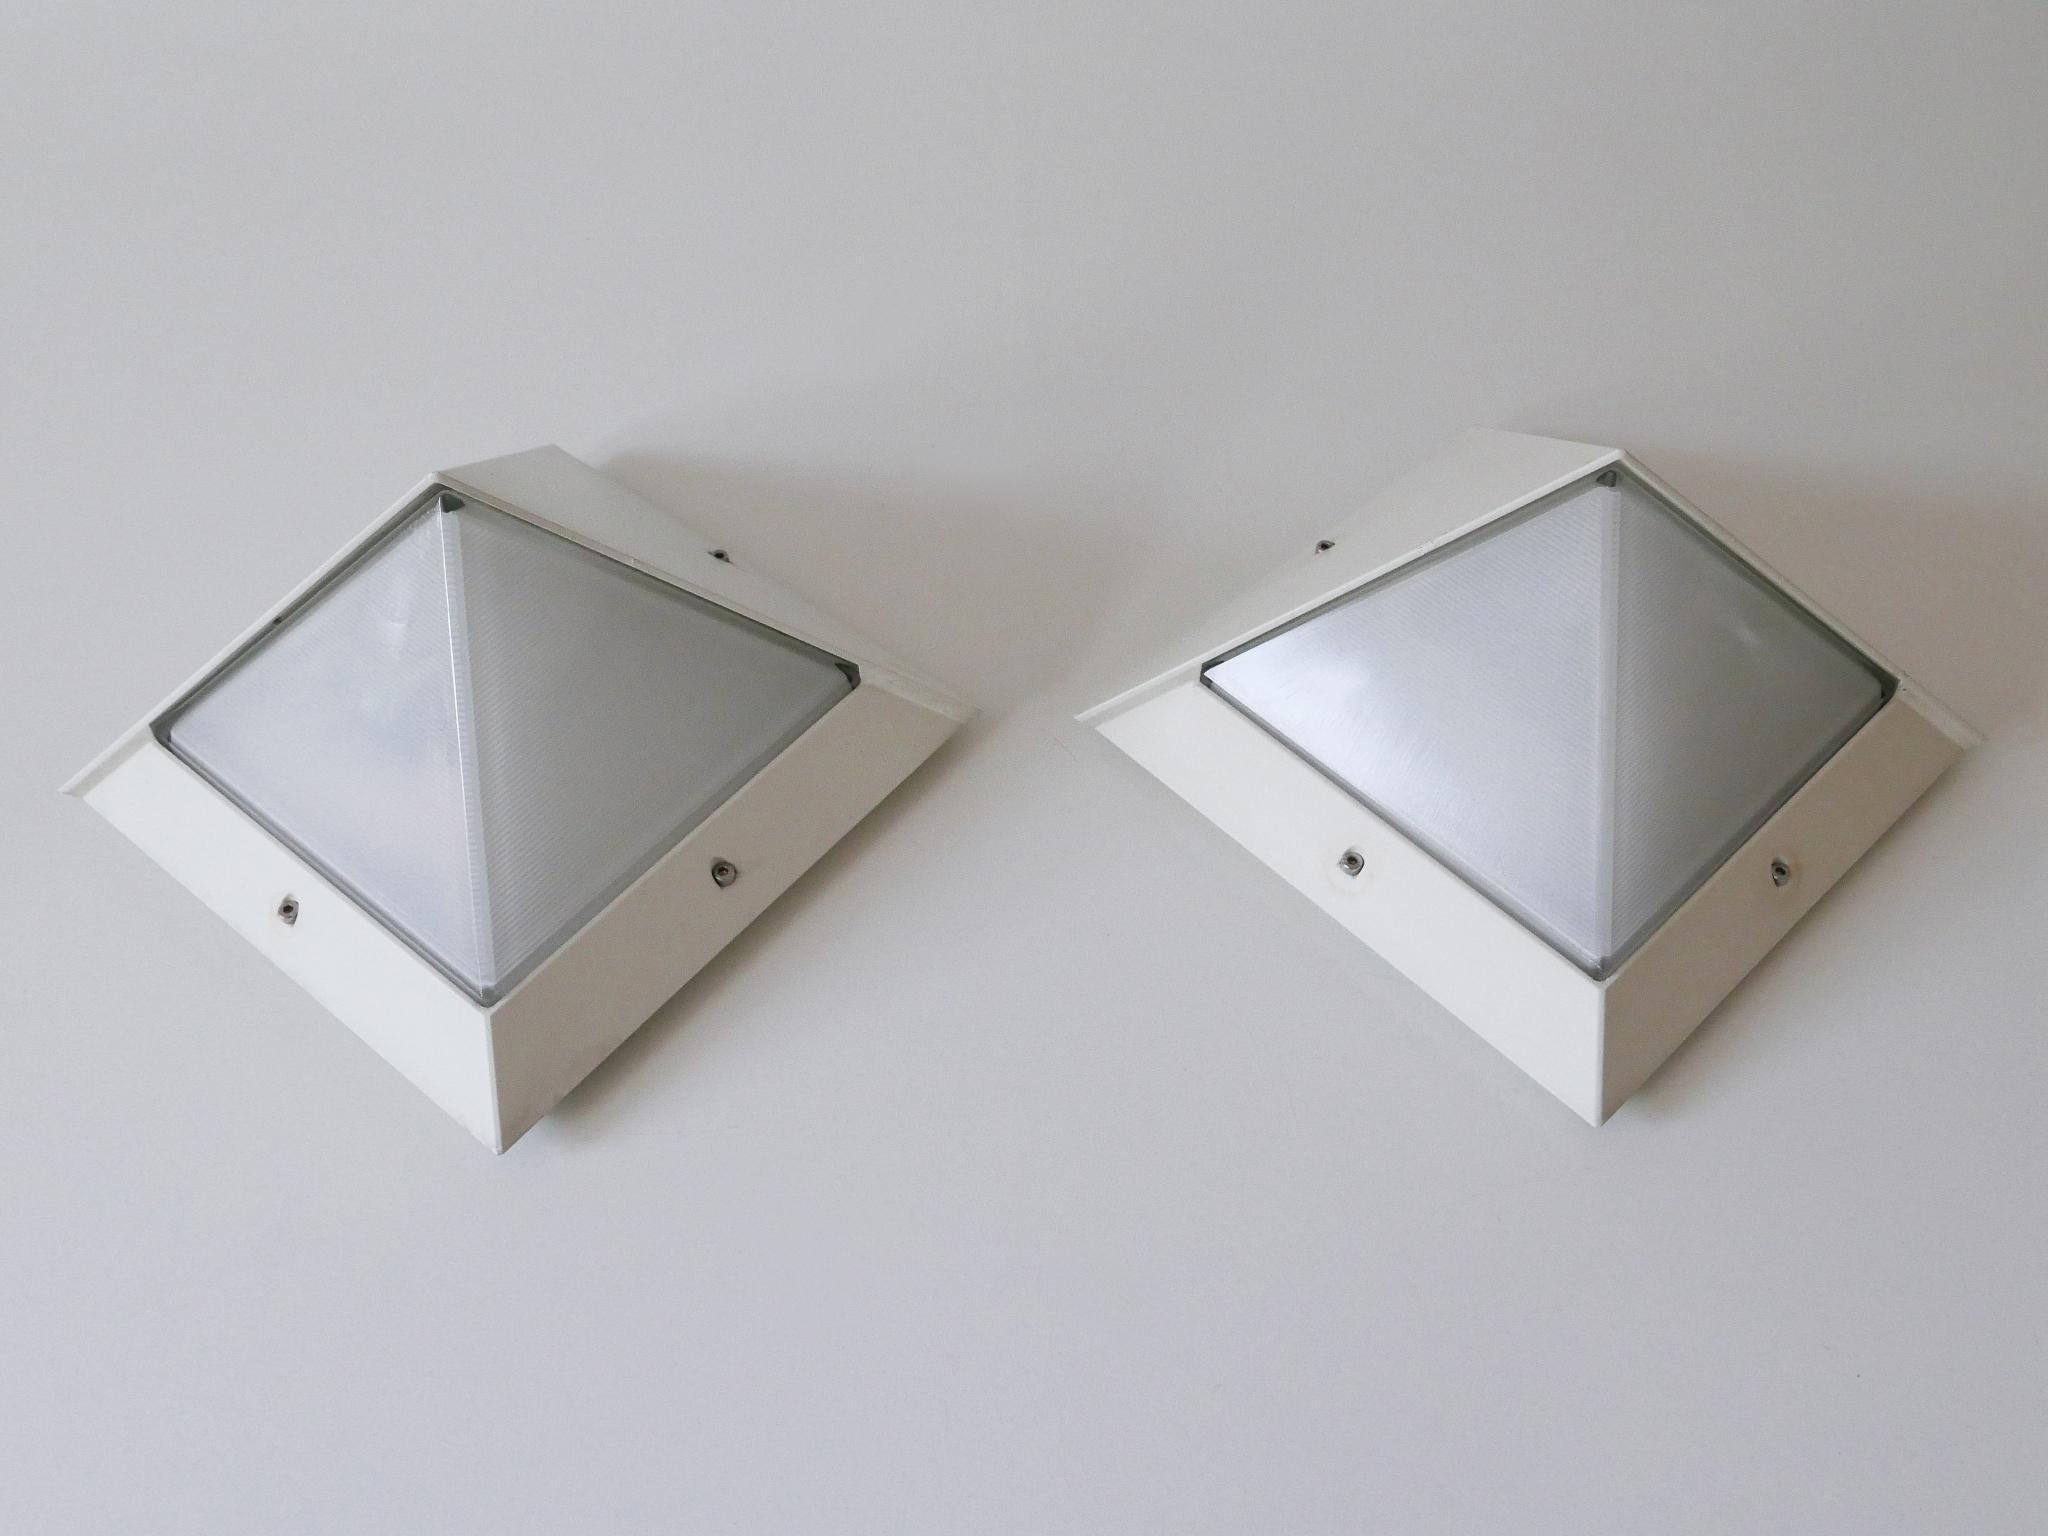 Aluminum Set of Two Medium Outdoor Wall Lamps or Sconces by BEGA, 1980s, Germany For Sale